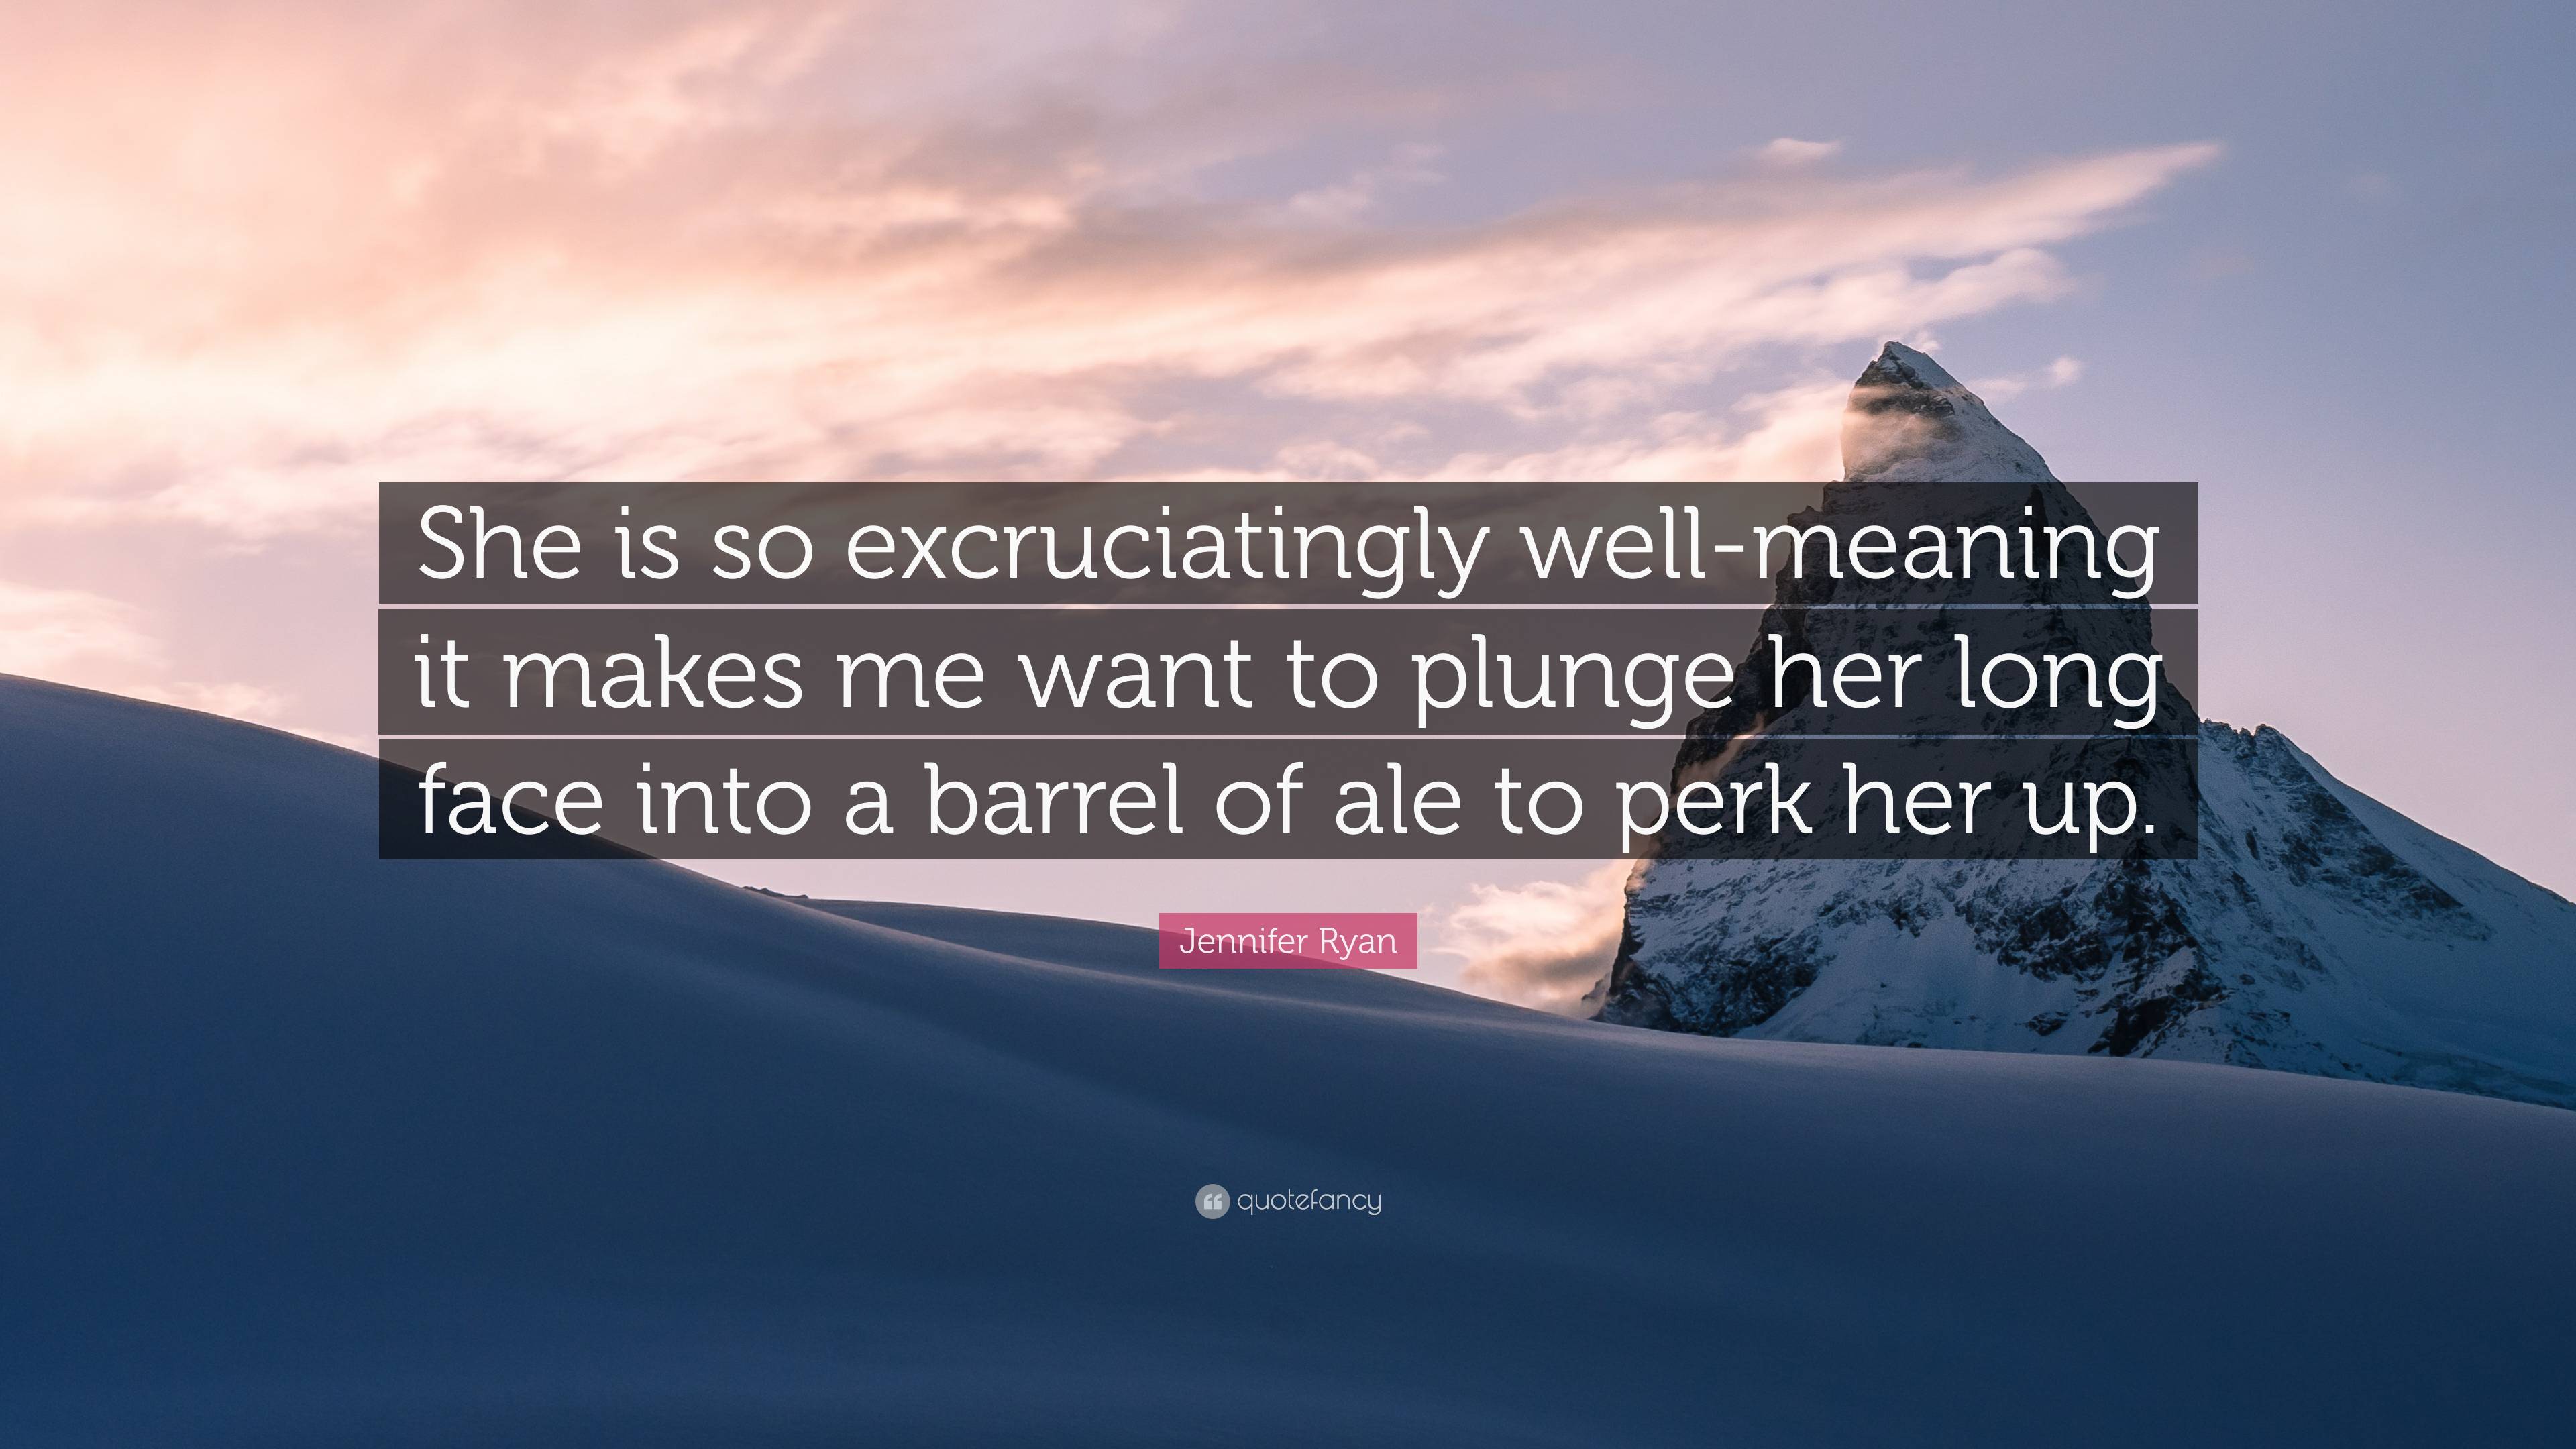 Jennifer Ryan Quote: “She is so excruciatingly well-meaning it makes me  want to plunge her